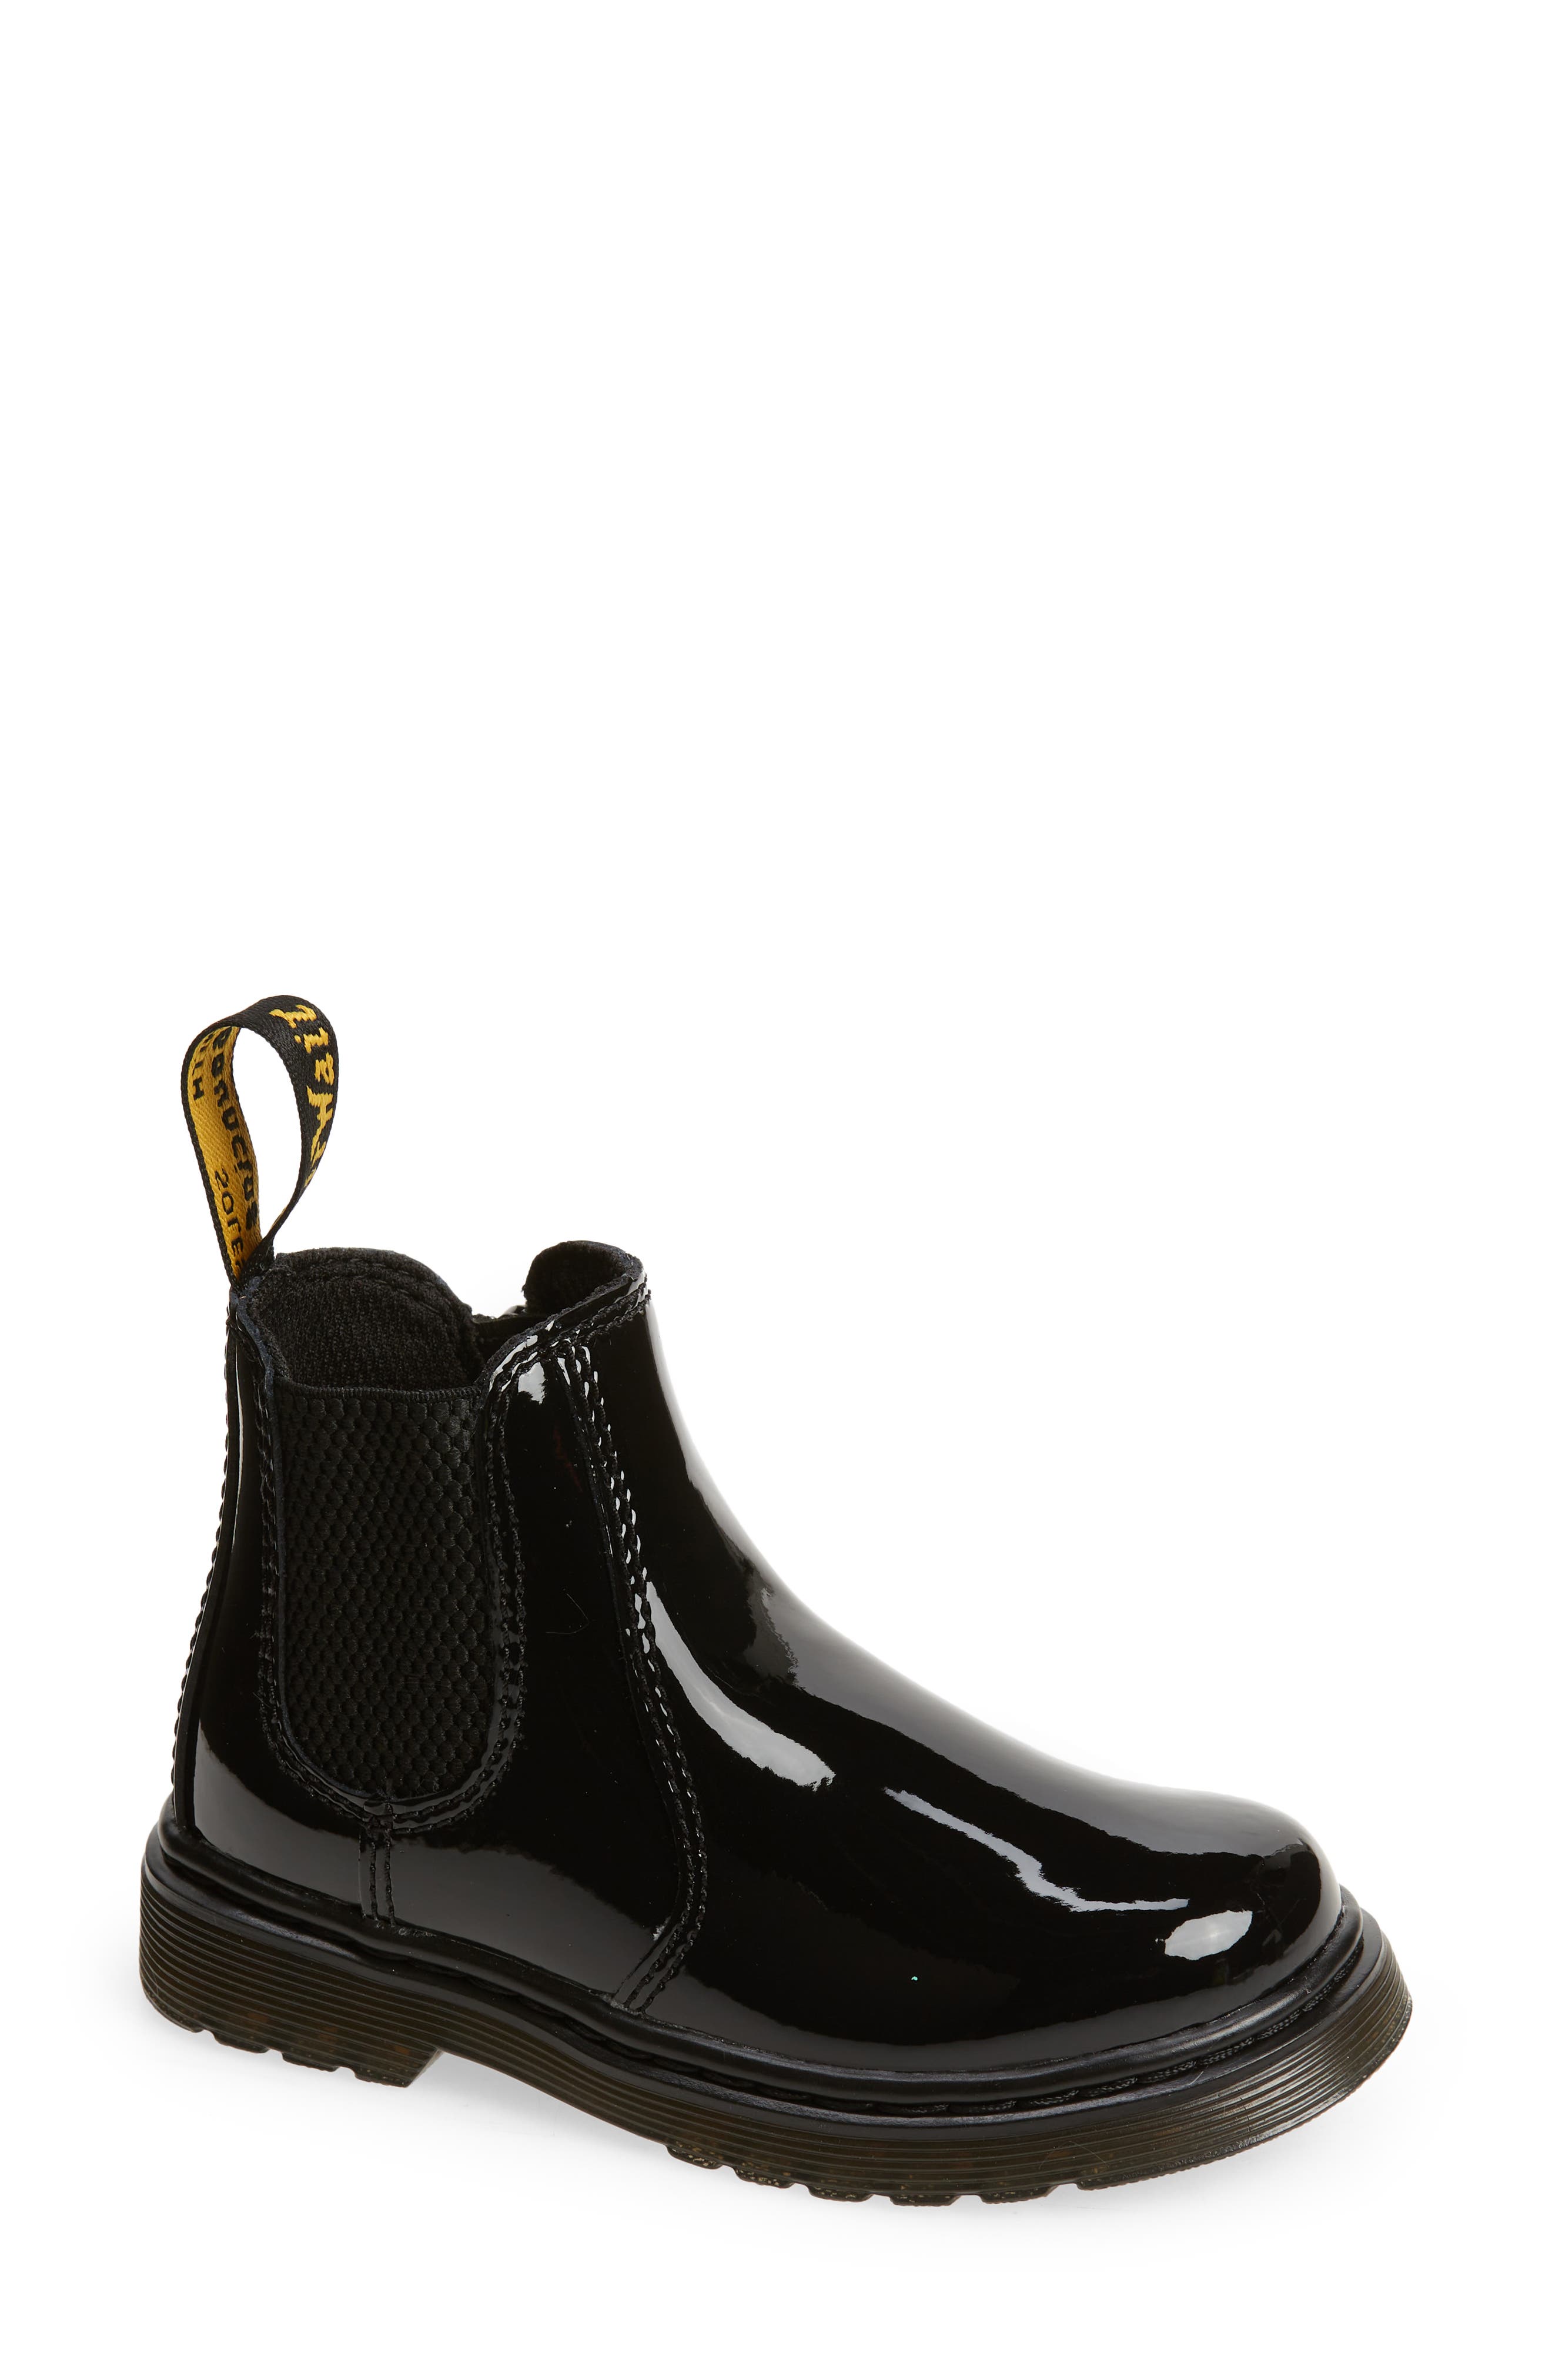 Dr.Martens Youth Torey Leather Shoes 